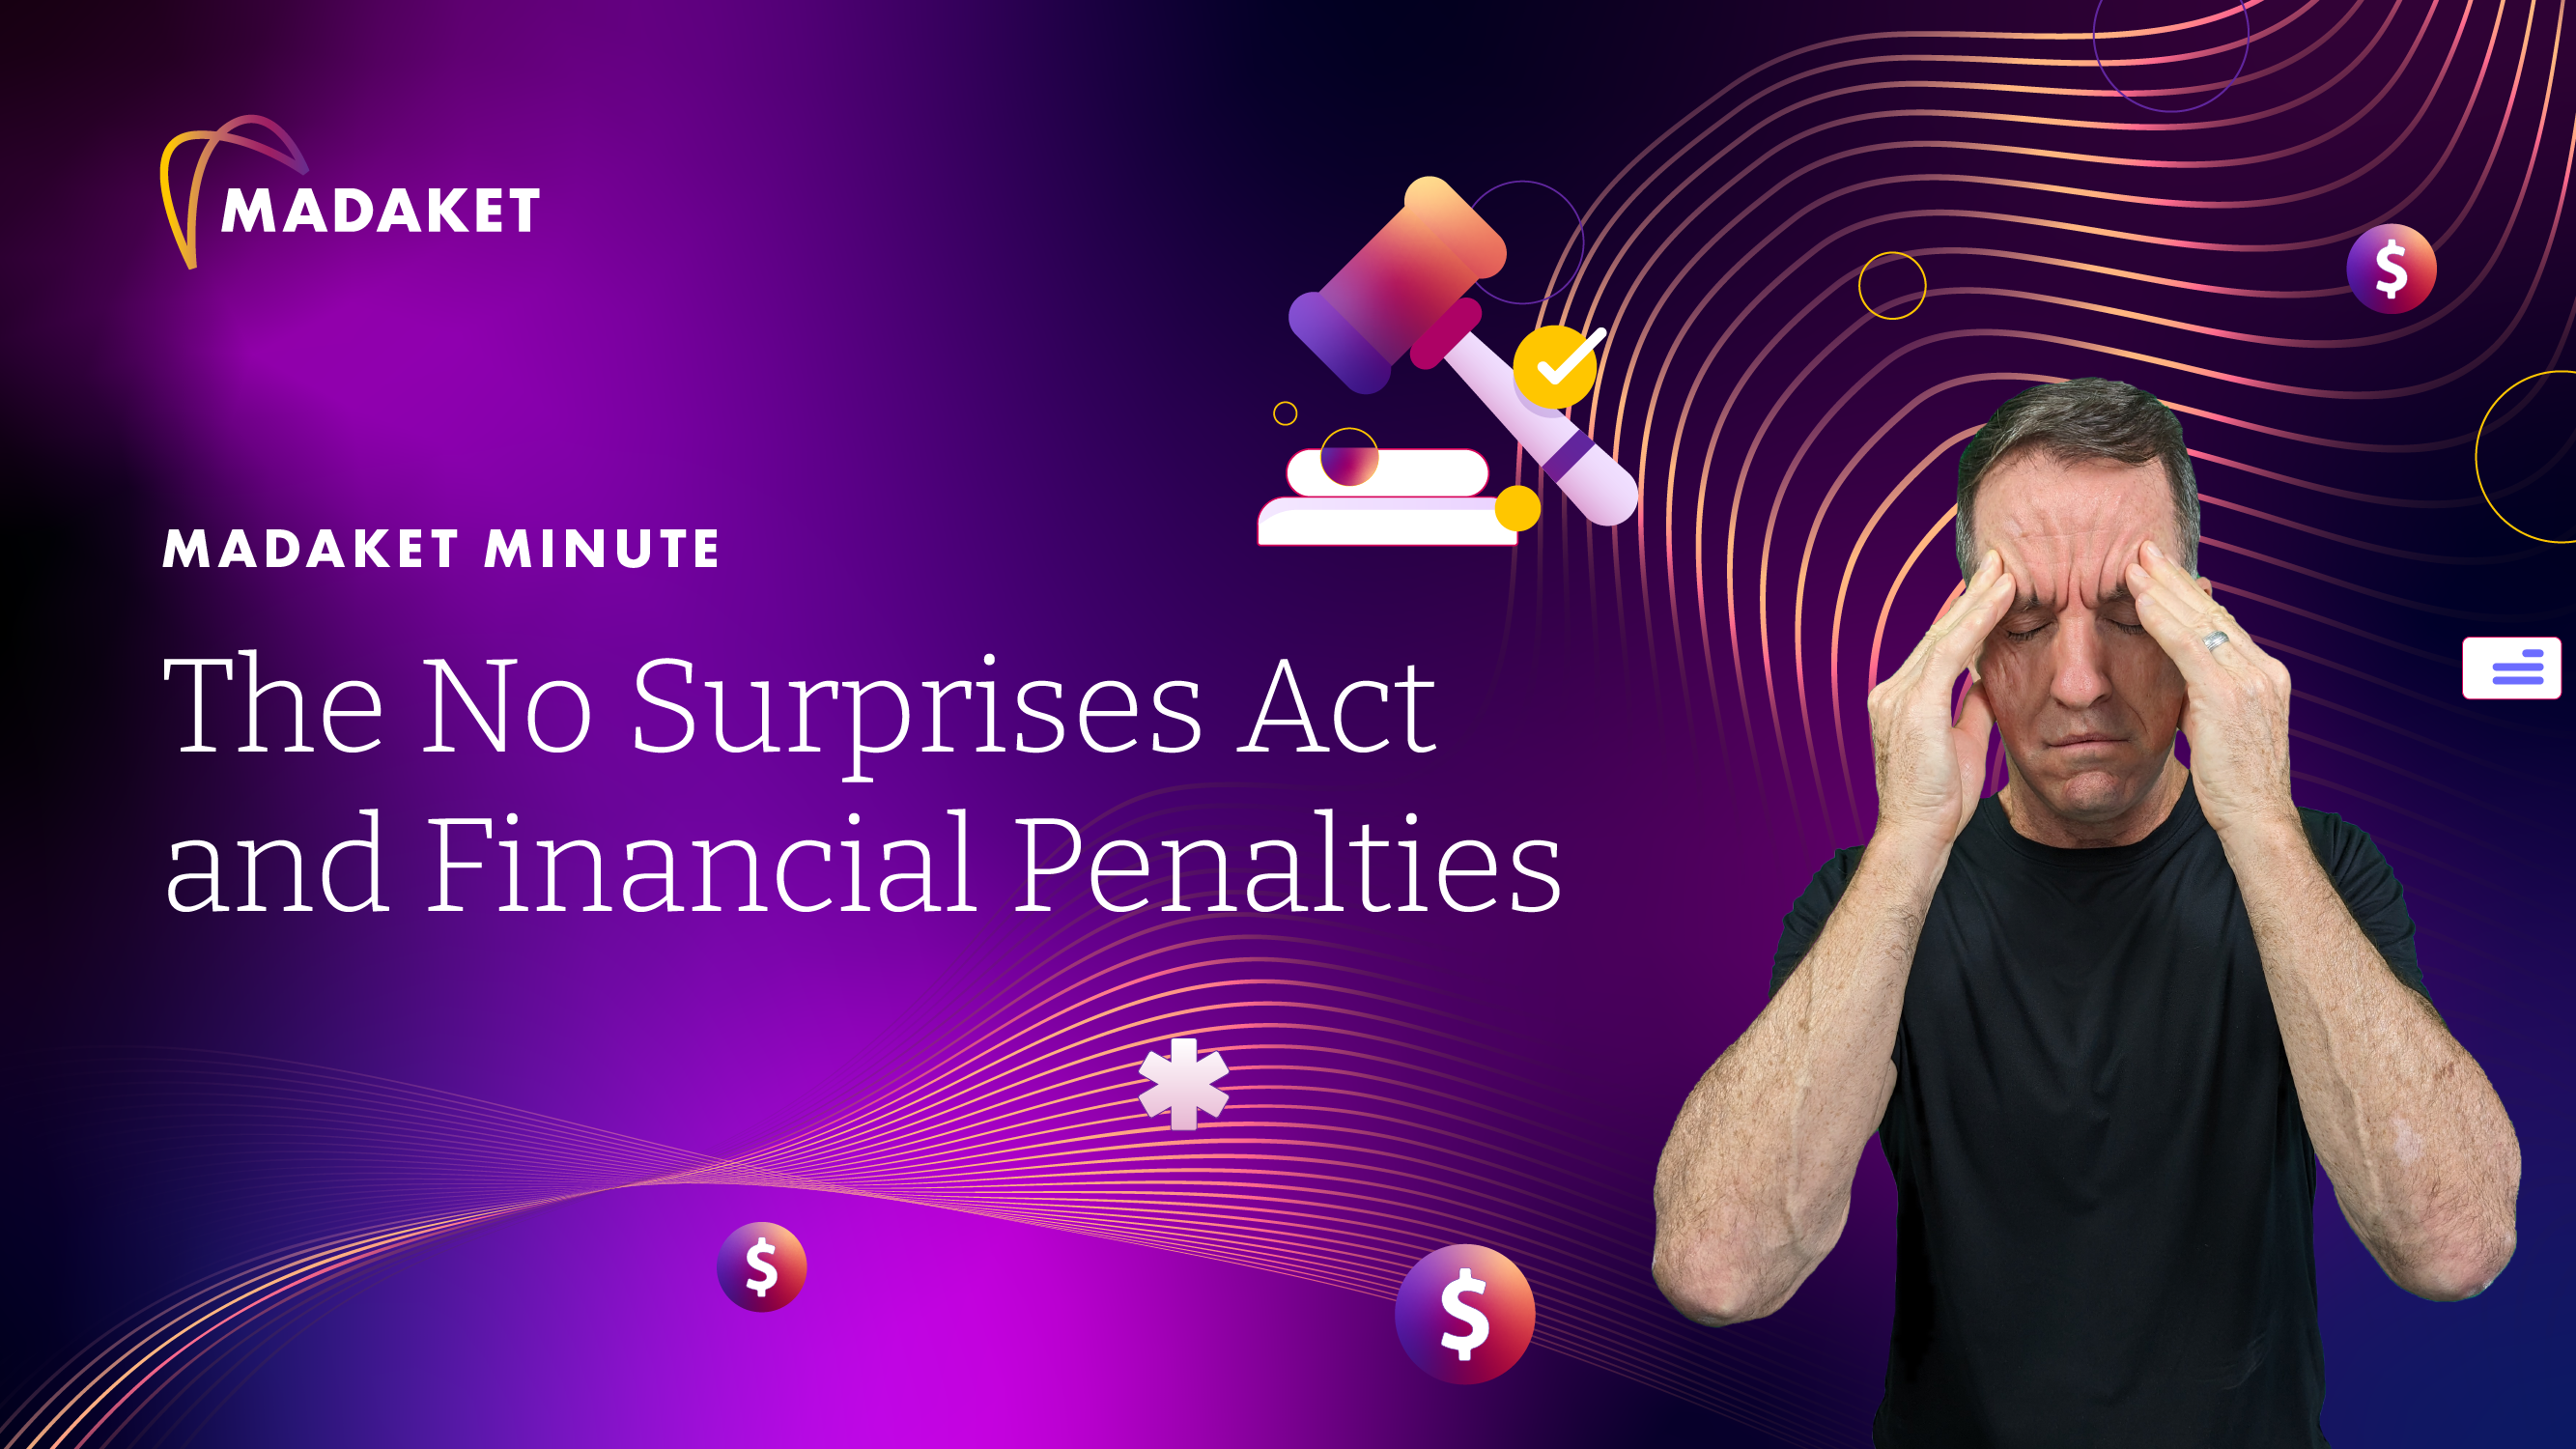 Madaket Minute Feature Image - The No Surprises Act and Financial Penalties